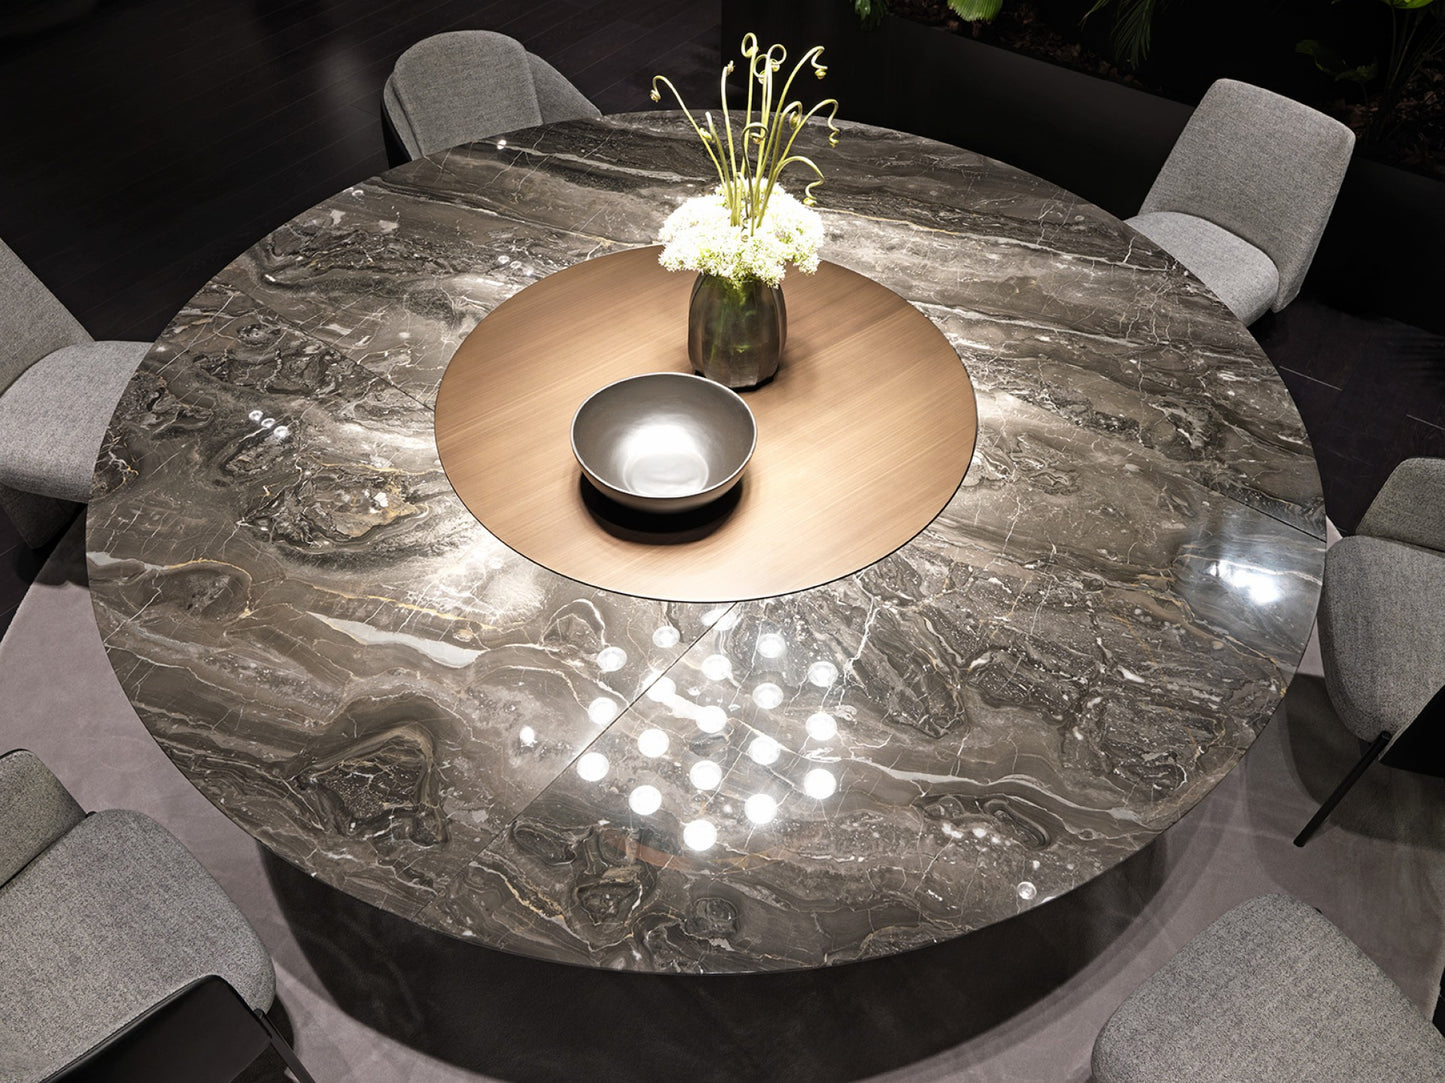 ALA | Dining table with lazy Susan by MisuraEmme